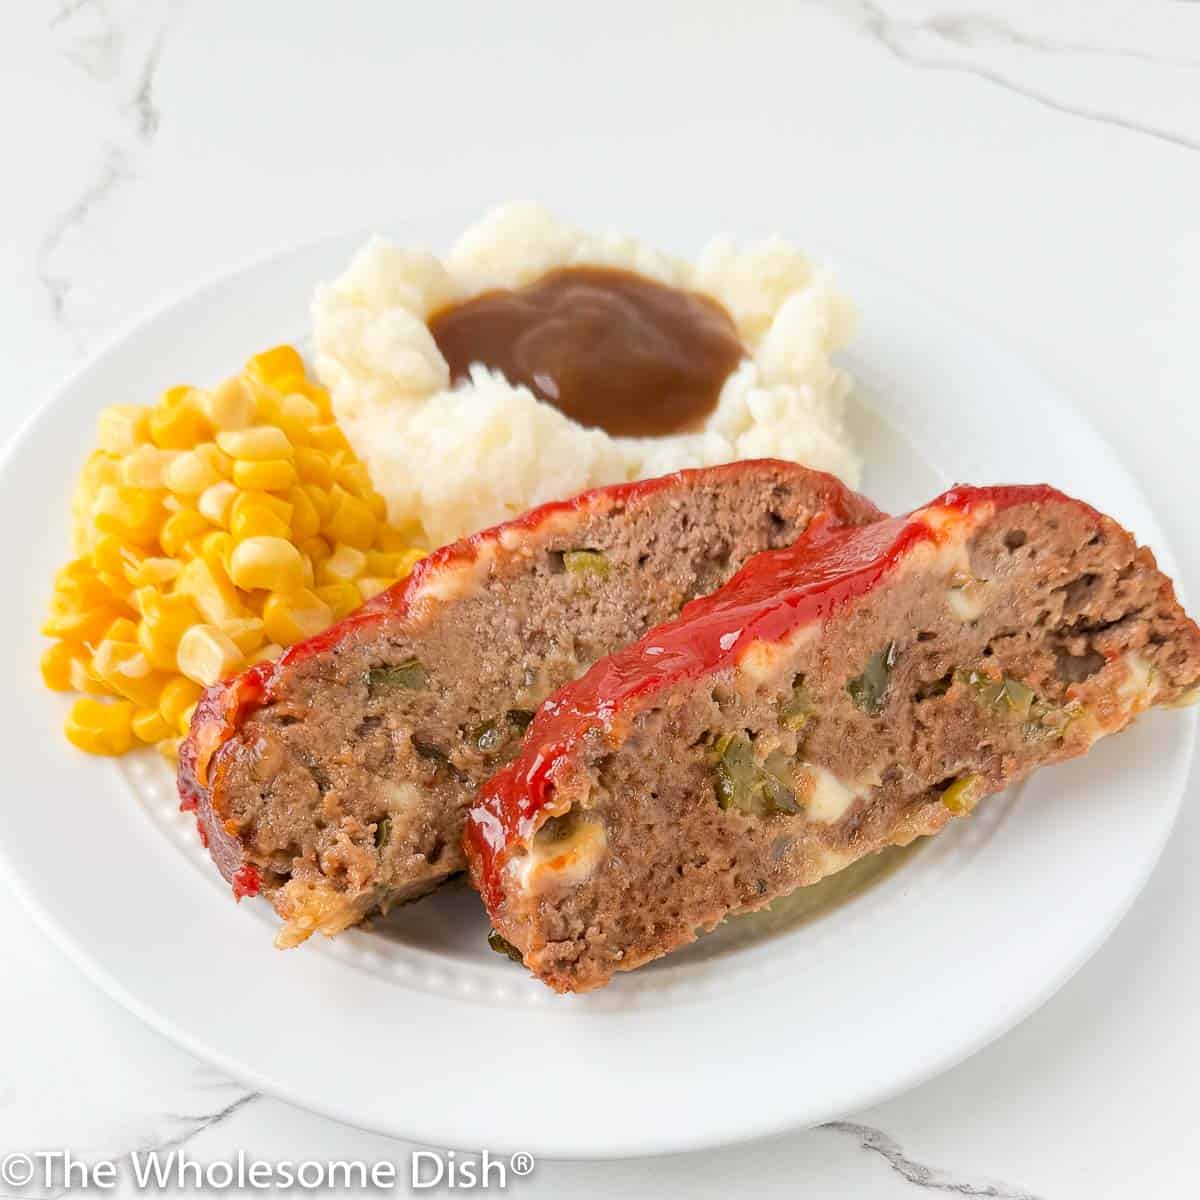 Two slices of meatloaf on a plate with mashed potatoes, gravy, and corn.